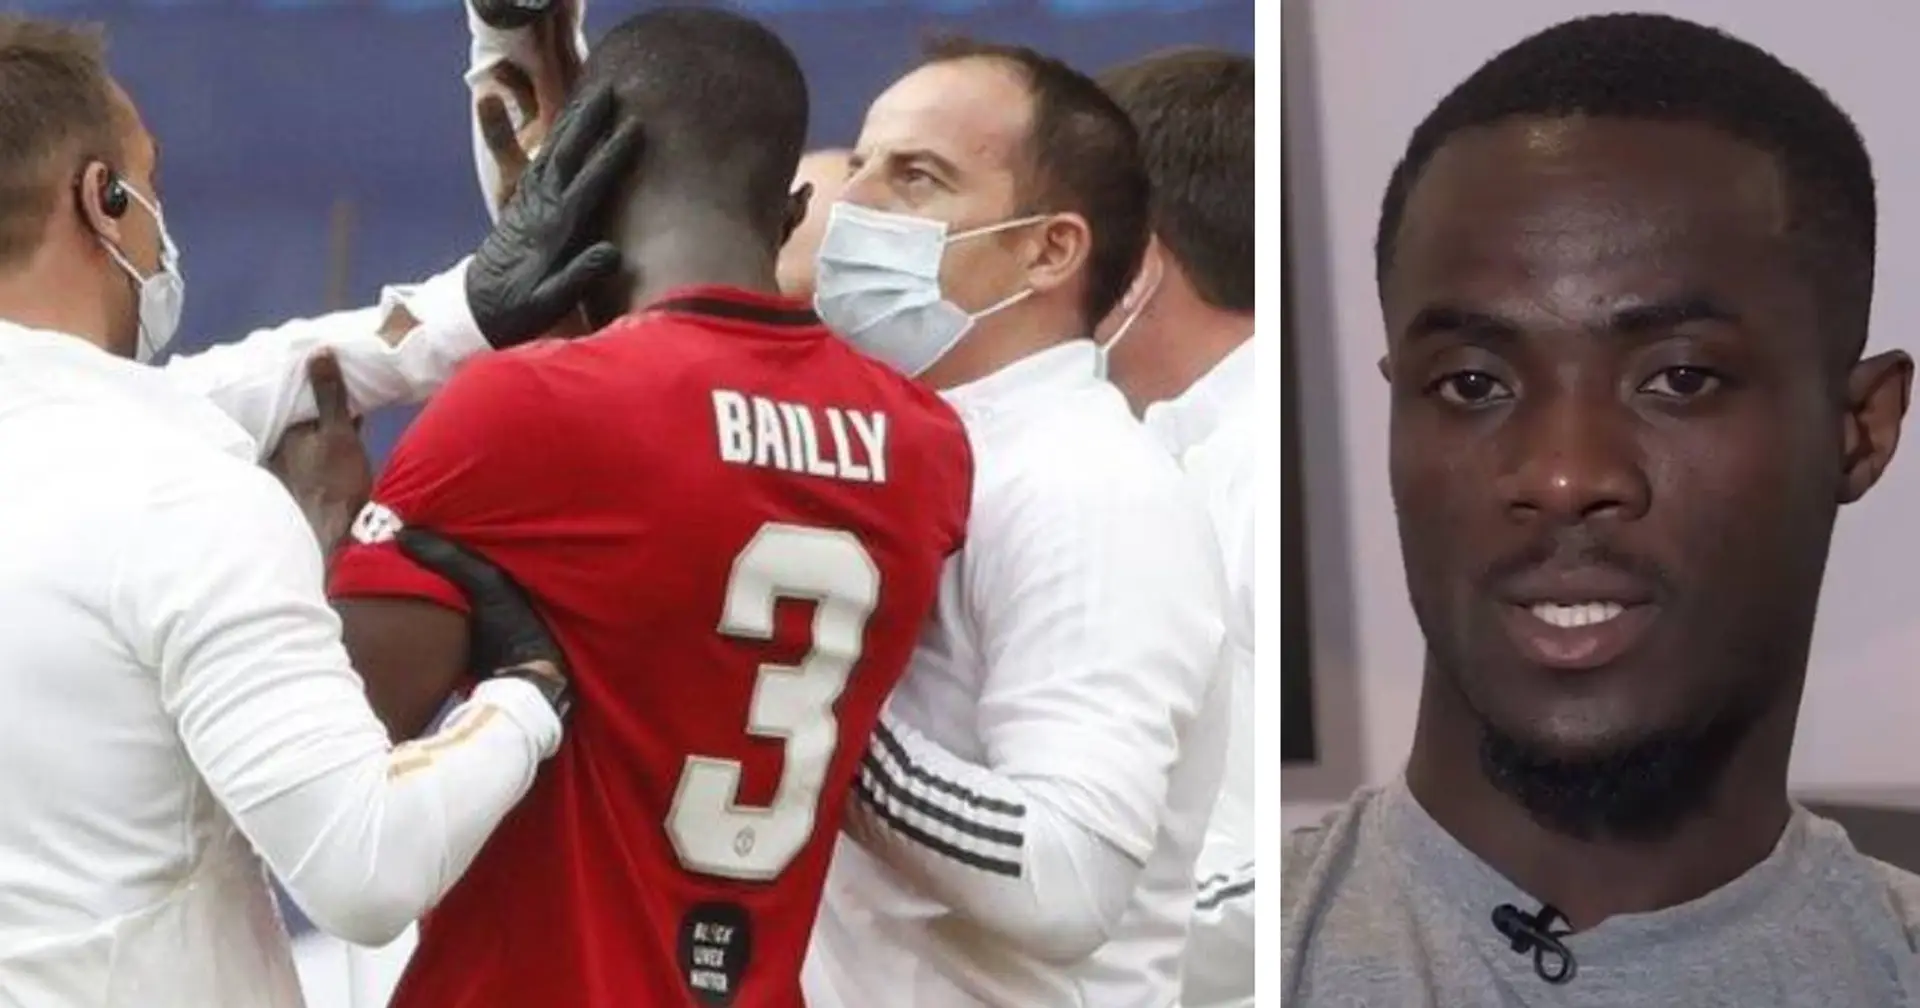 Bailly opens up on injury hell & 3 more under-radar Man United stories